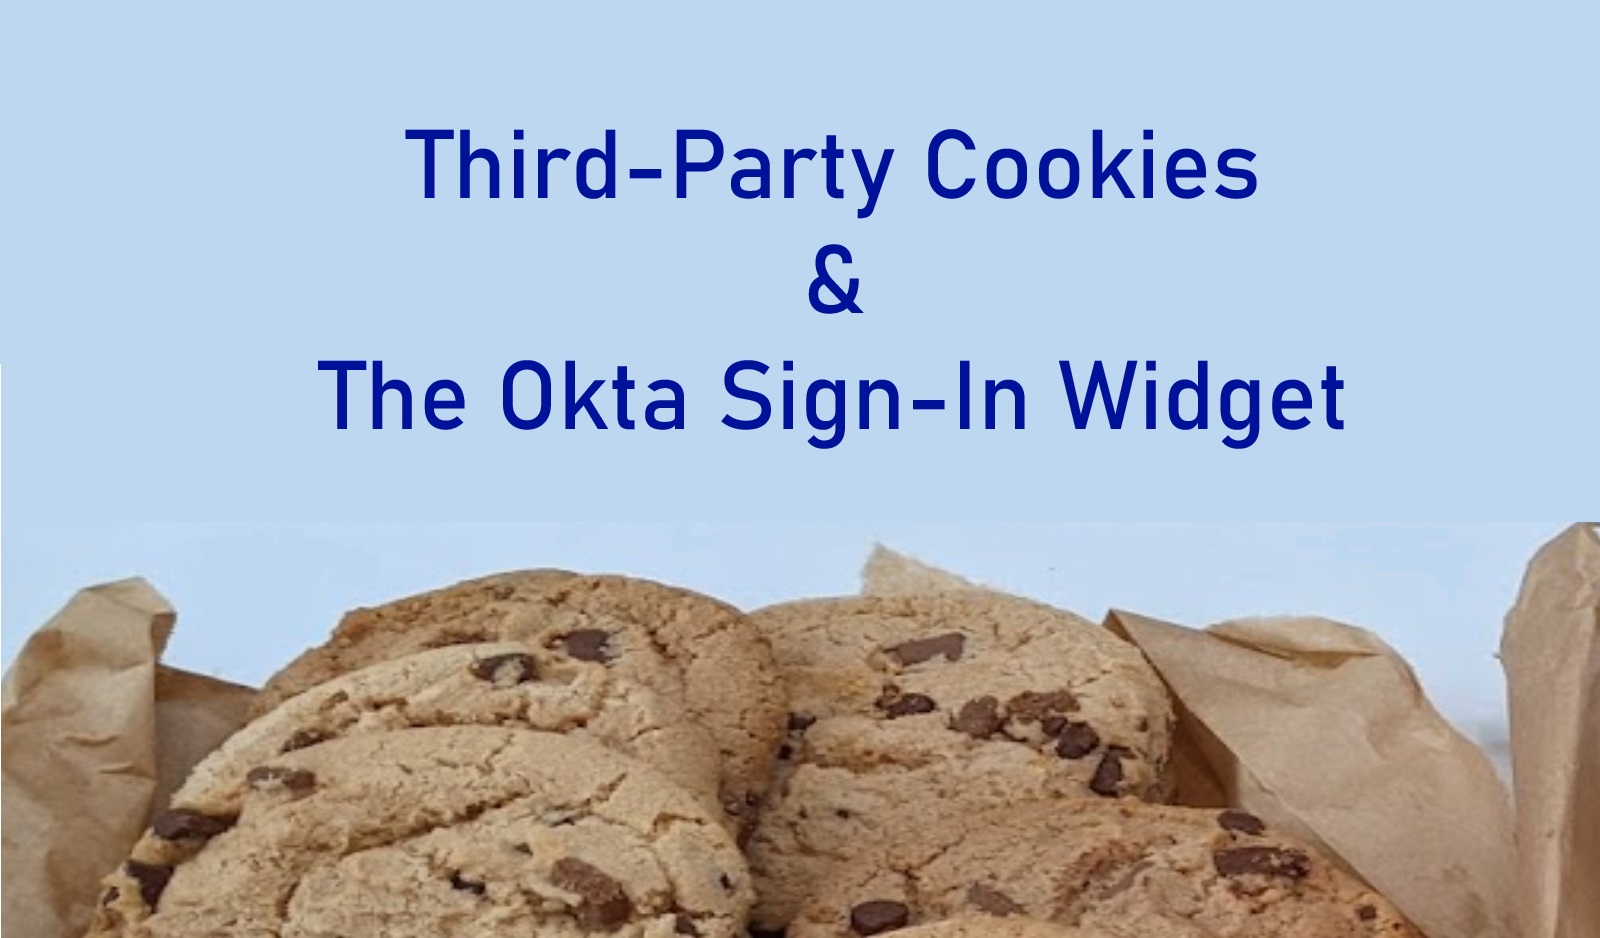 How to Prepare Your Self-Hosted Okta Sign-in Widget to Work without Third-Party Cookies